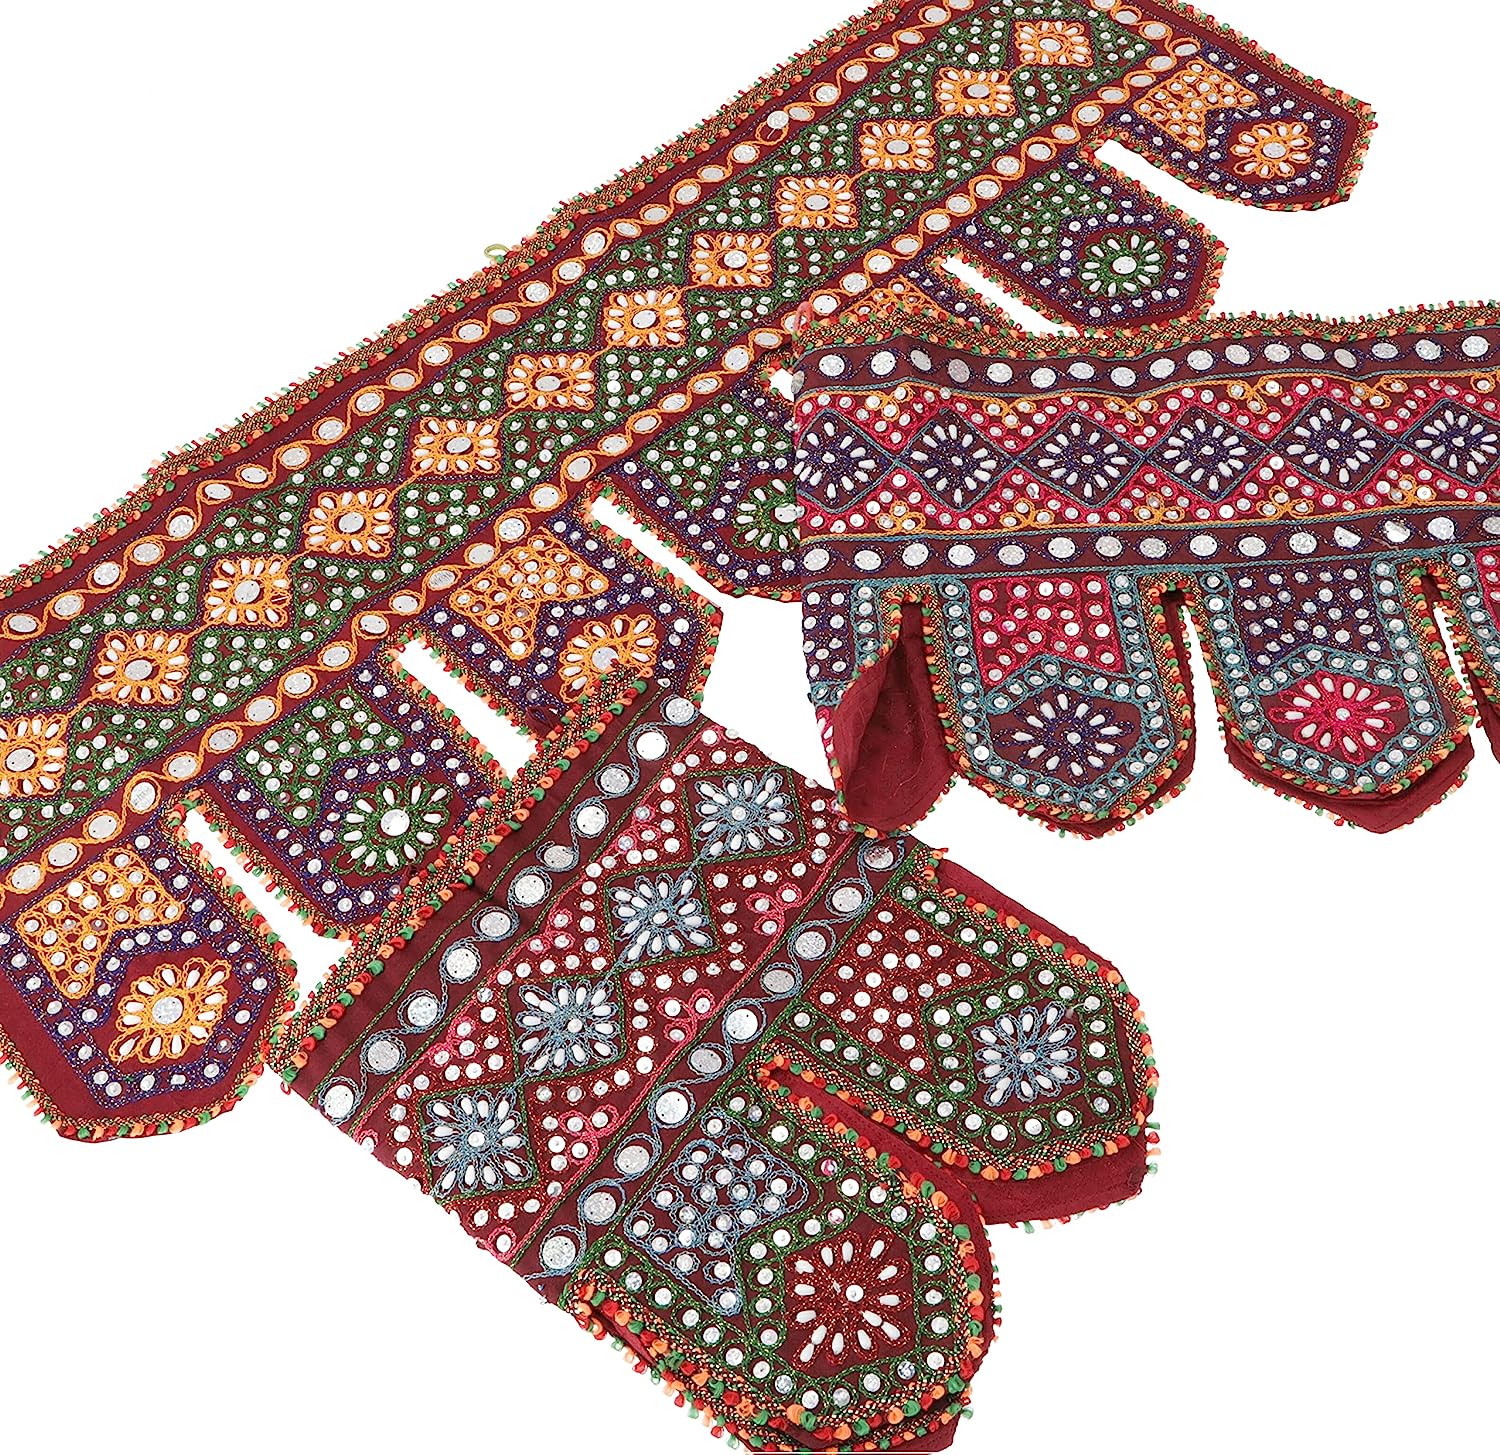 GURU SHOP Indian Wall Hanging, Oriental Bunting with Sequins, Toran - Bordeaux Red, Cotton, 30 x 85 cm, Wall Bags & Wall Hangings